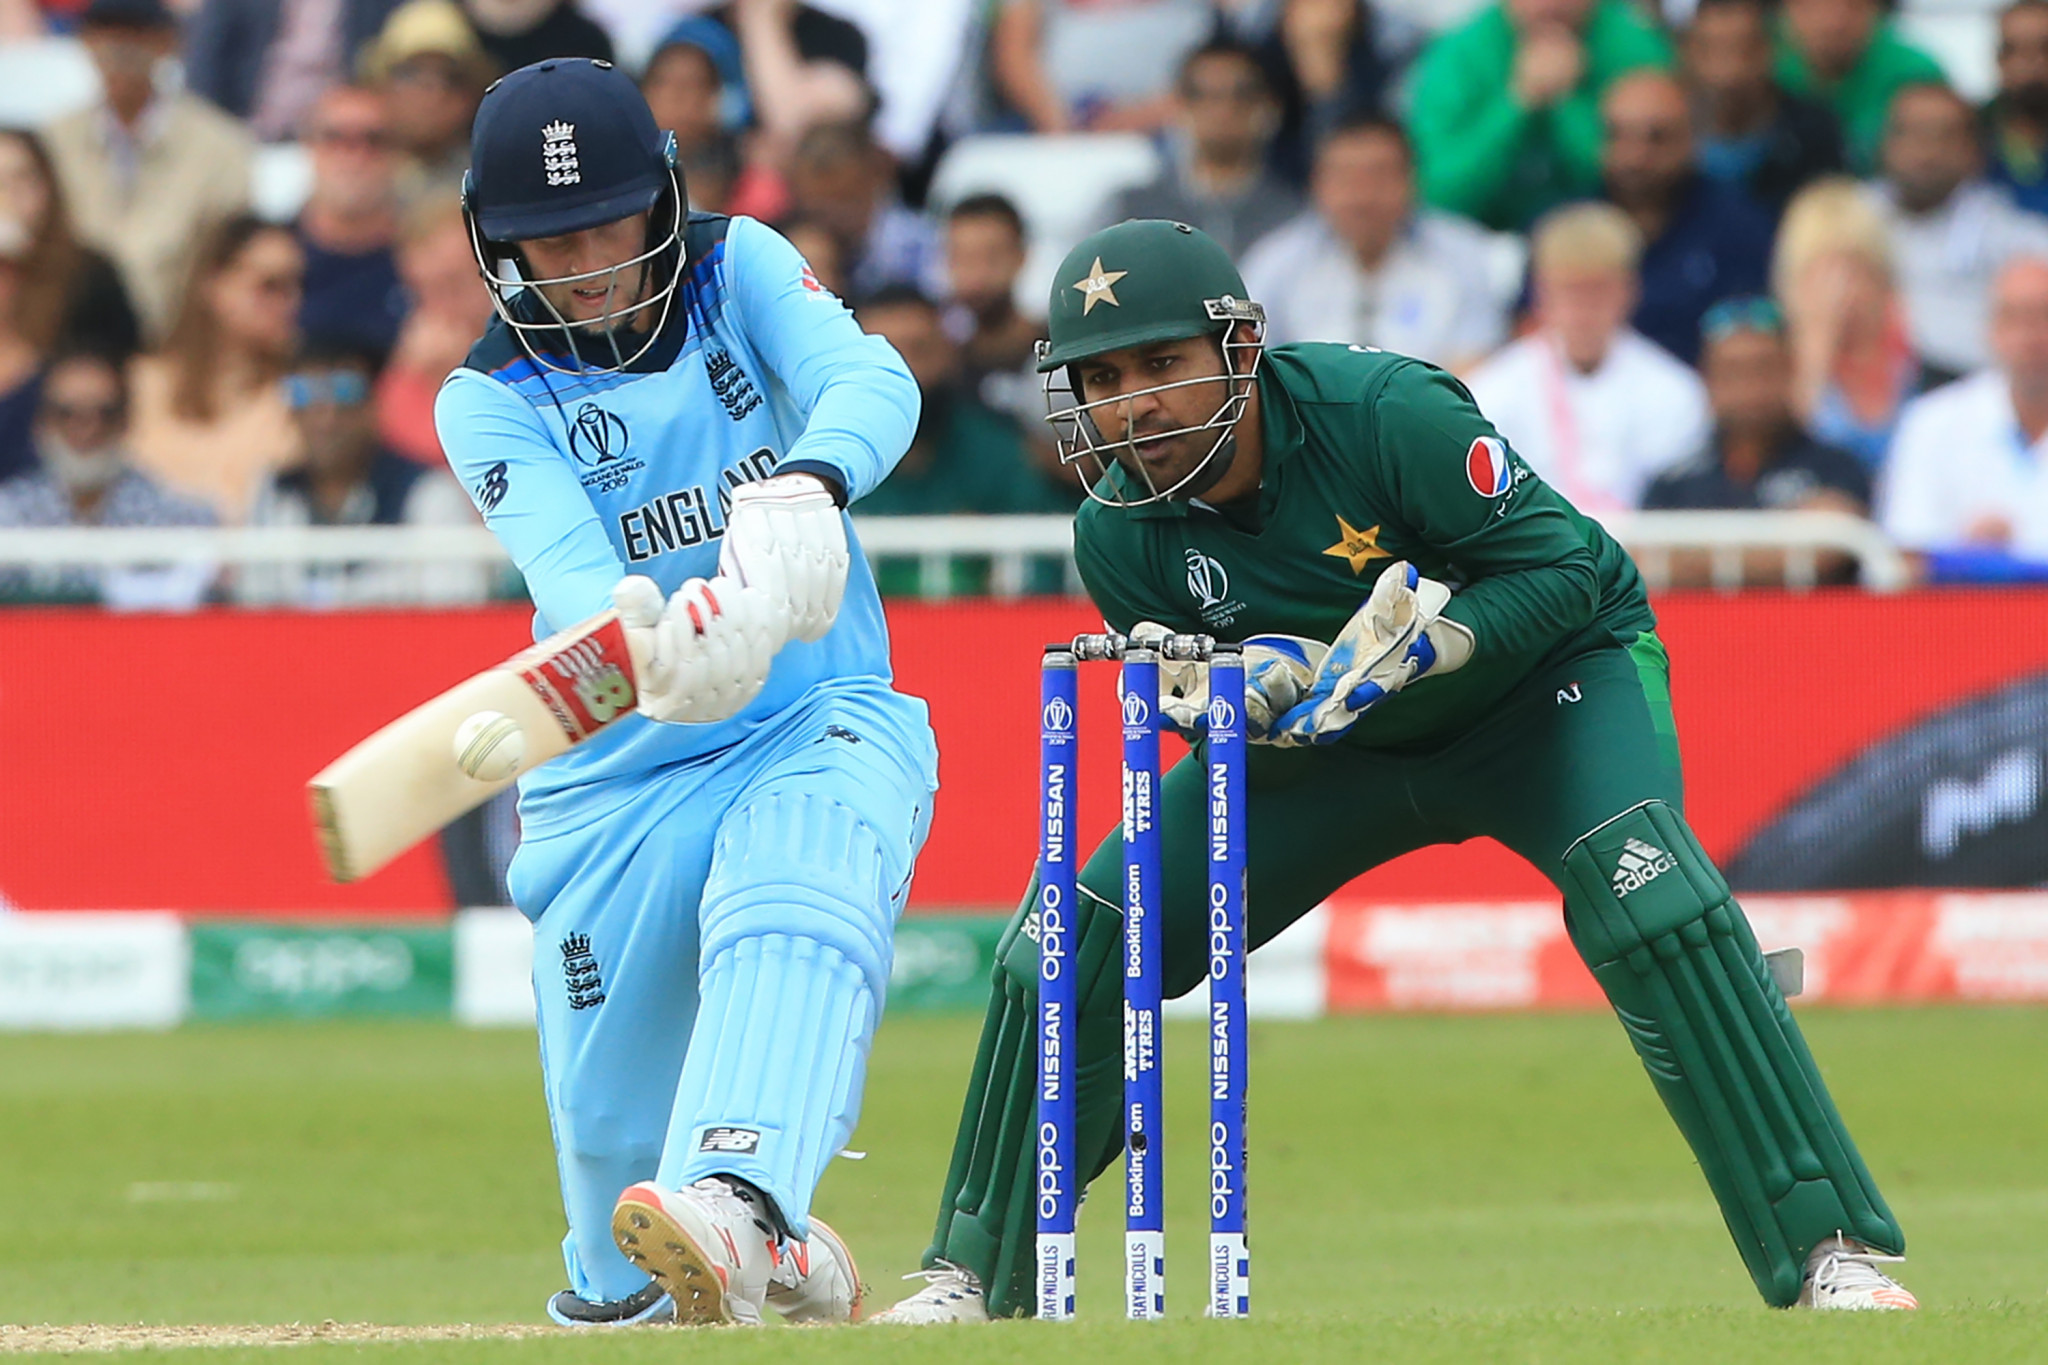 England's Joe Root hit the first century of the World Cup but it was in vain as Pakistan won ©Getty Images